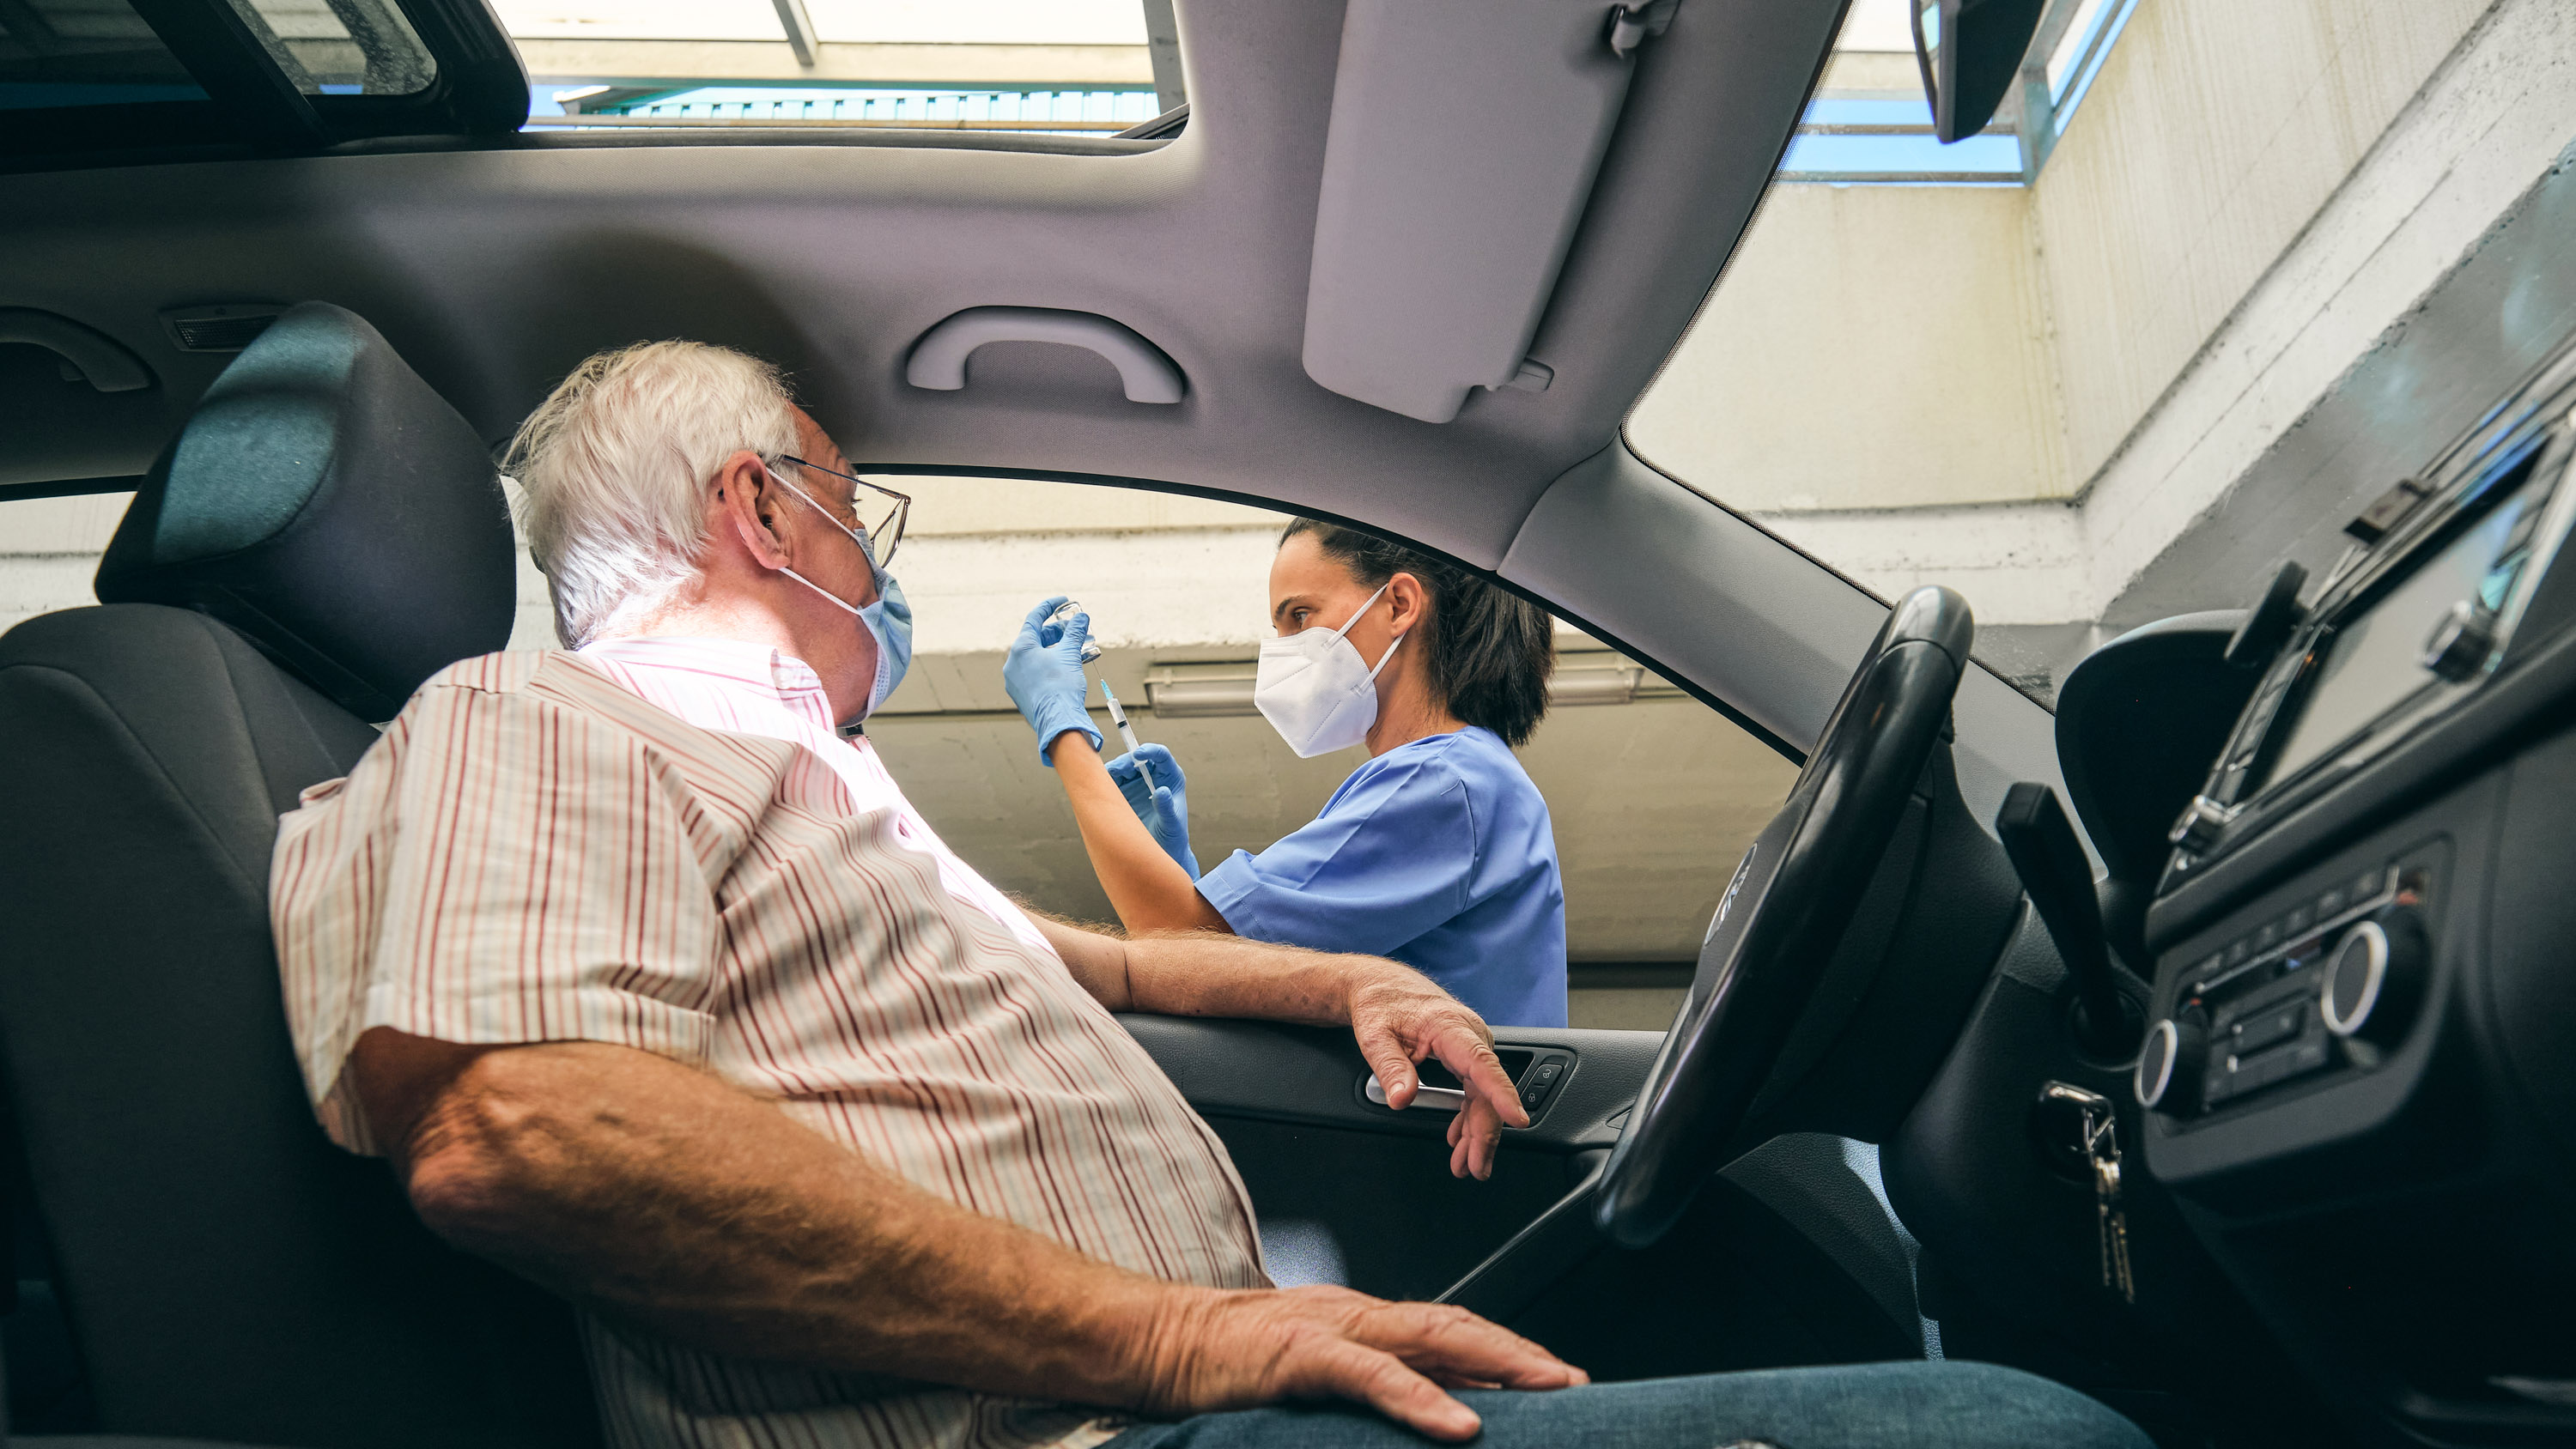 Elderly male patient in automobile watches a medical professional prepare his covid vaccine at a drive-thru clinic